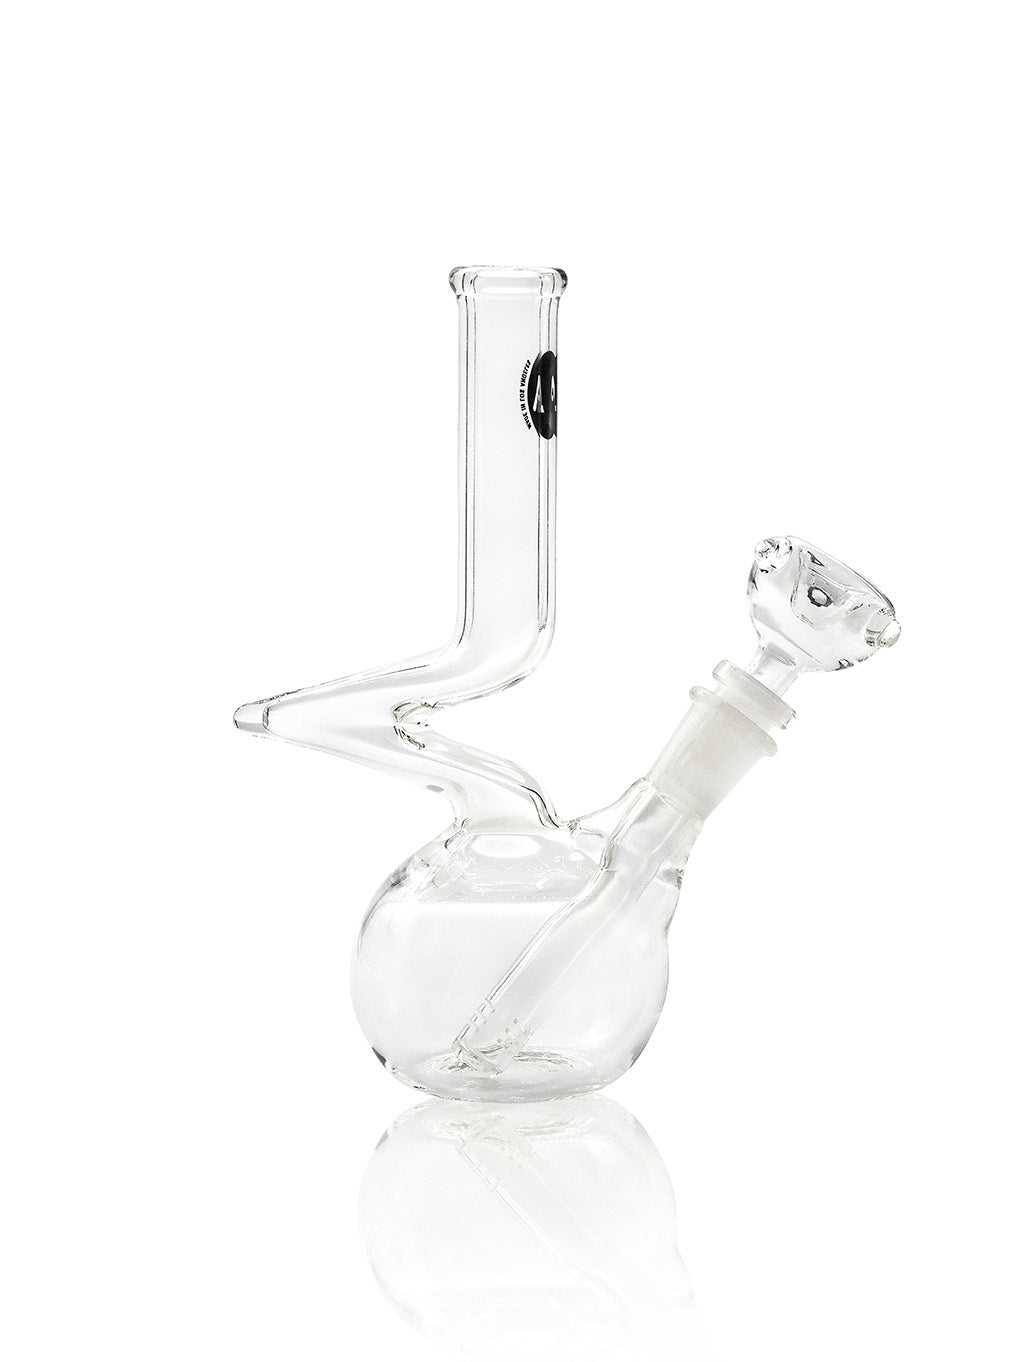 LA Pipes "The Zong" Compact Bong with unique Zong design, 8" height, made of Borosilicate Glass